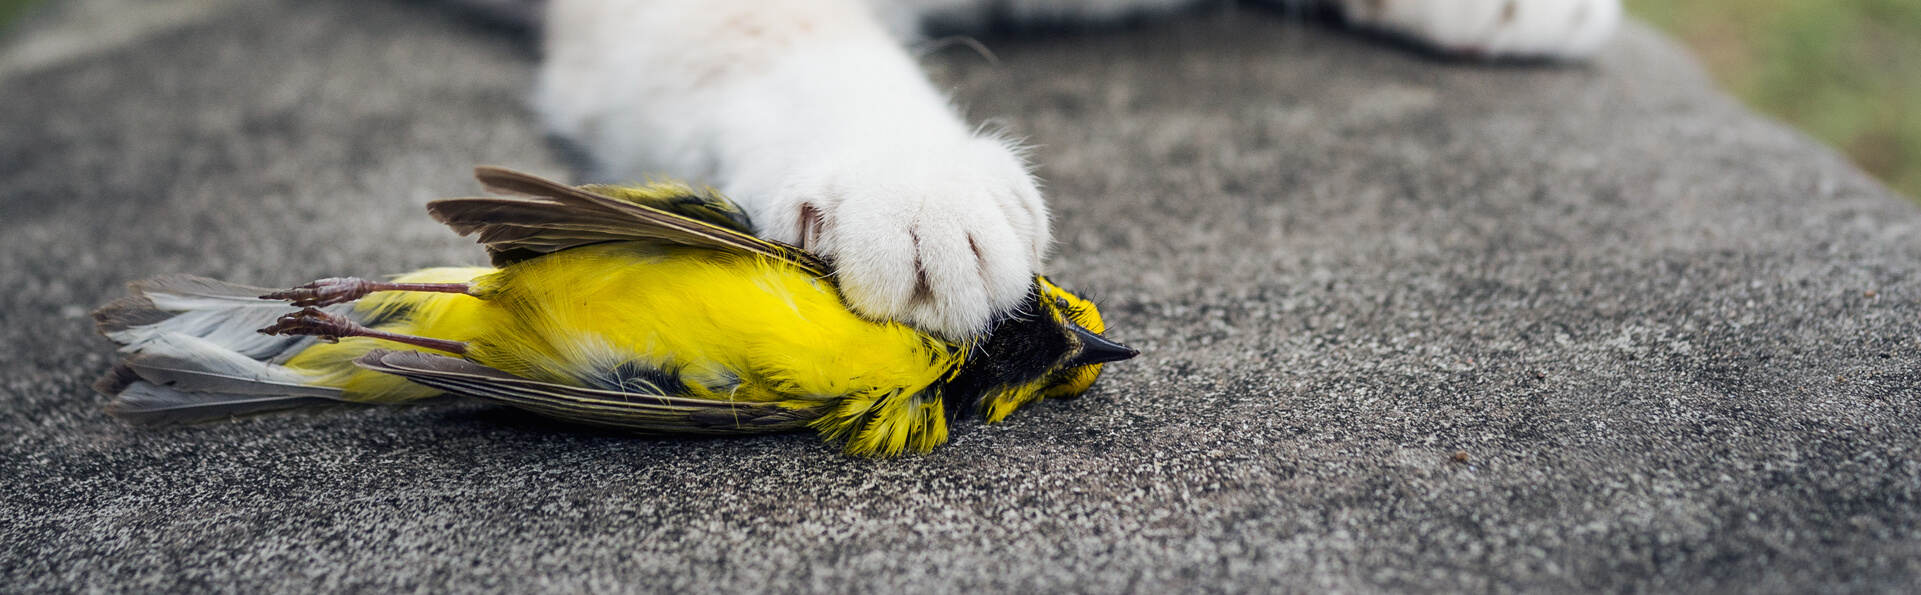 Hooded Warbler killed by cat, forestpath/Shutterstock